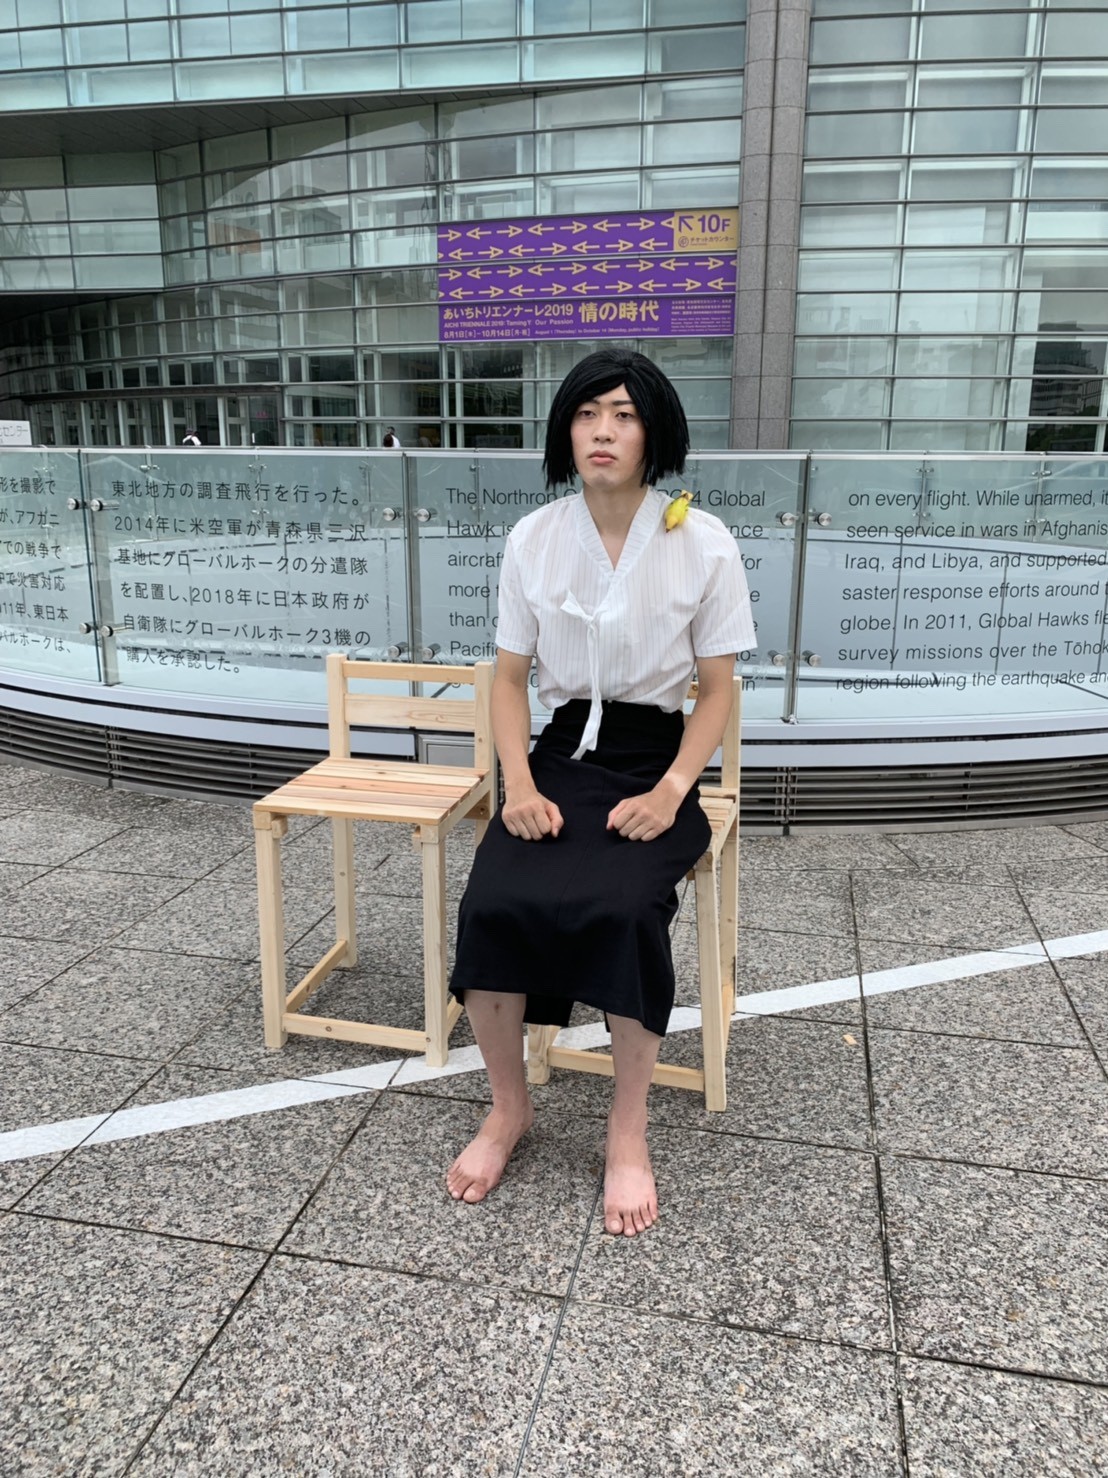 [Sad news] University of Tokyo, cosplaying comfort women as a protest against discontinuation of expression